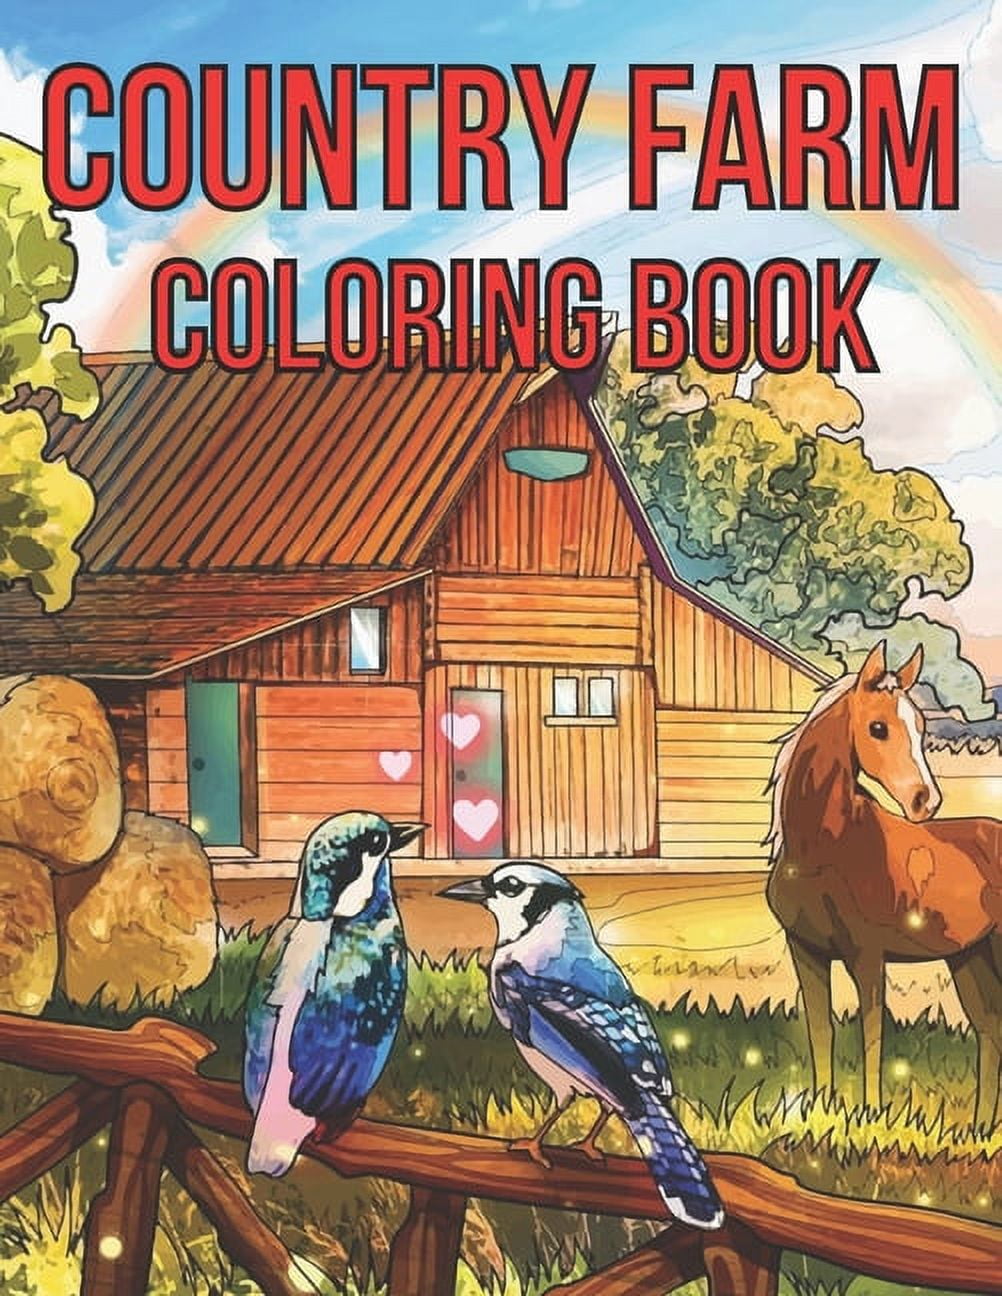 Country Style Coloring Books, Set of 5 - Adult Coloring - Miles Kimball